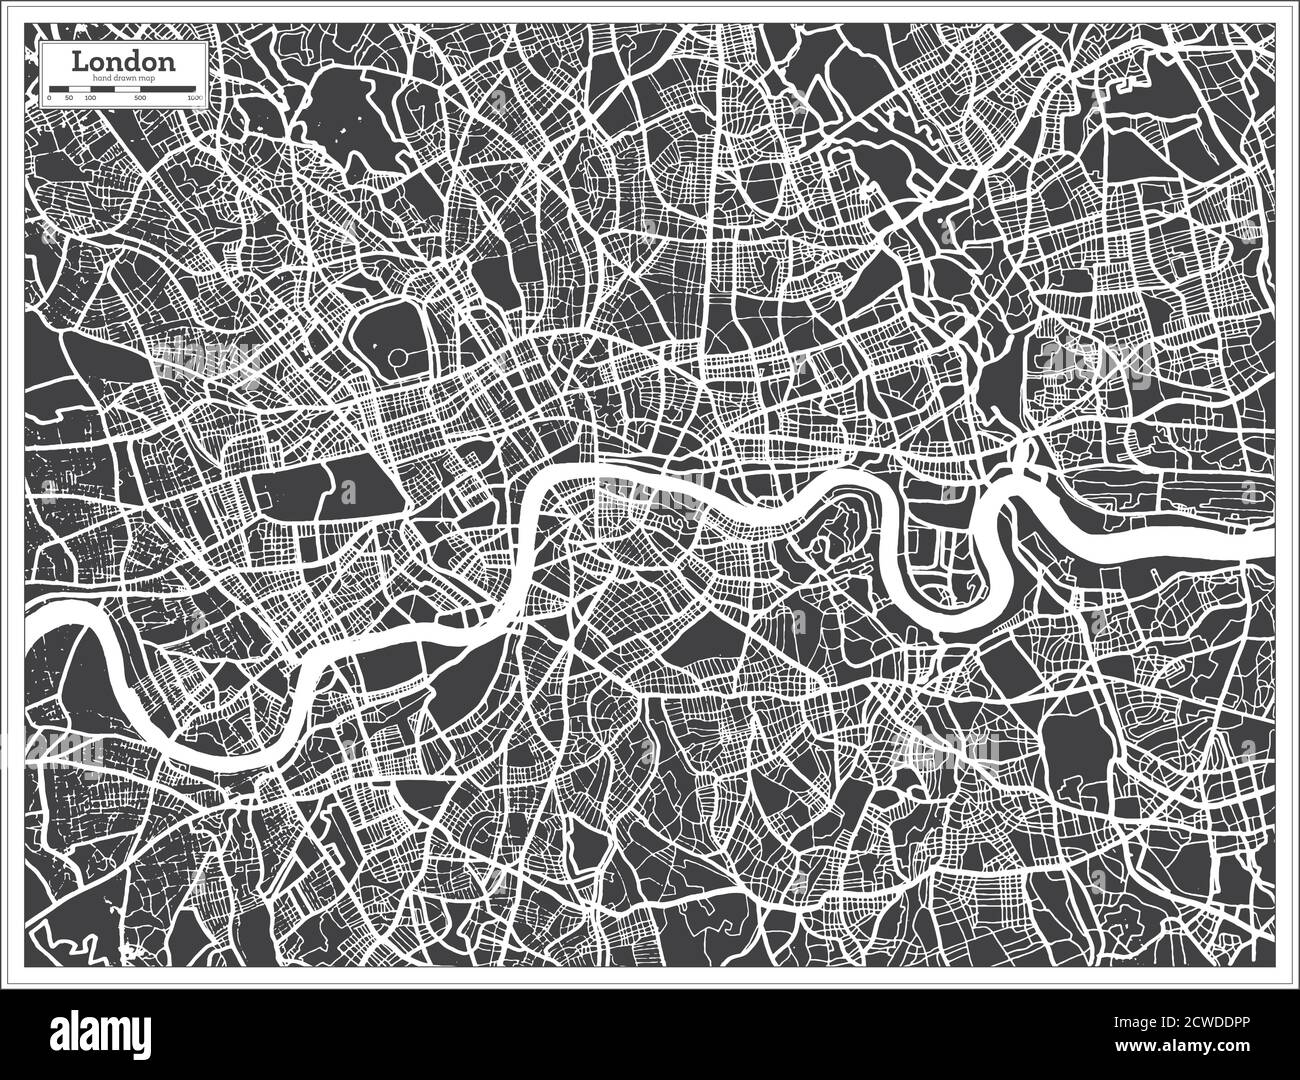 London UK City Map in Black and White Color in Retro Style. Outline Map ...